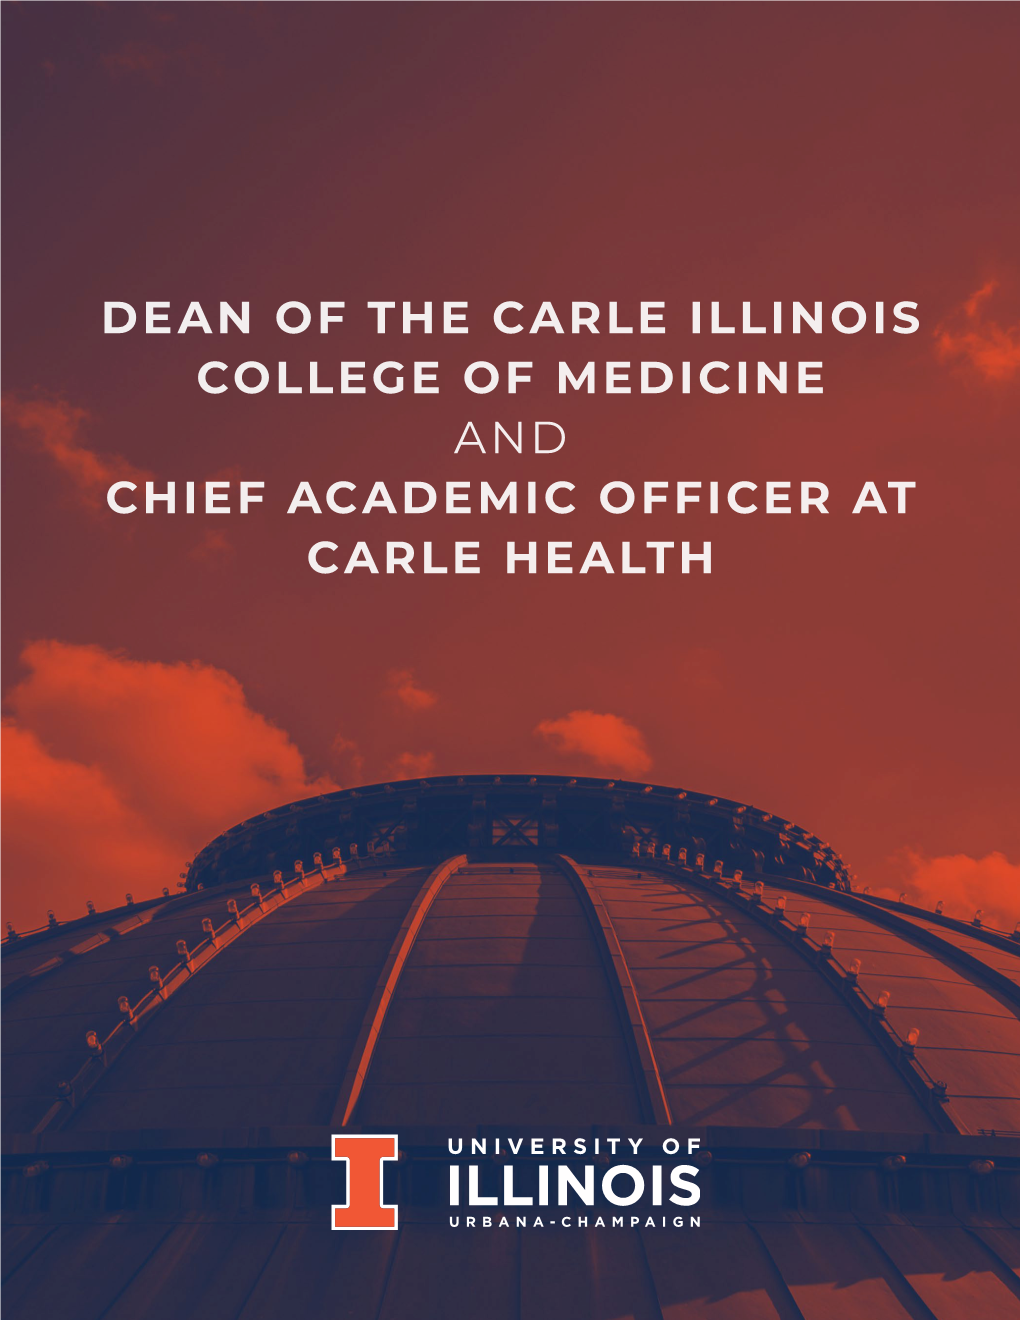 Dean of the Carle Illinois College of Medicine and Chief Academic Officer at Carle Health Leadership Profile